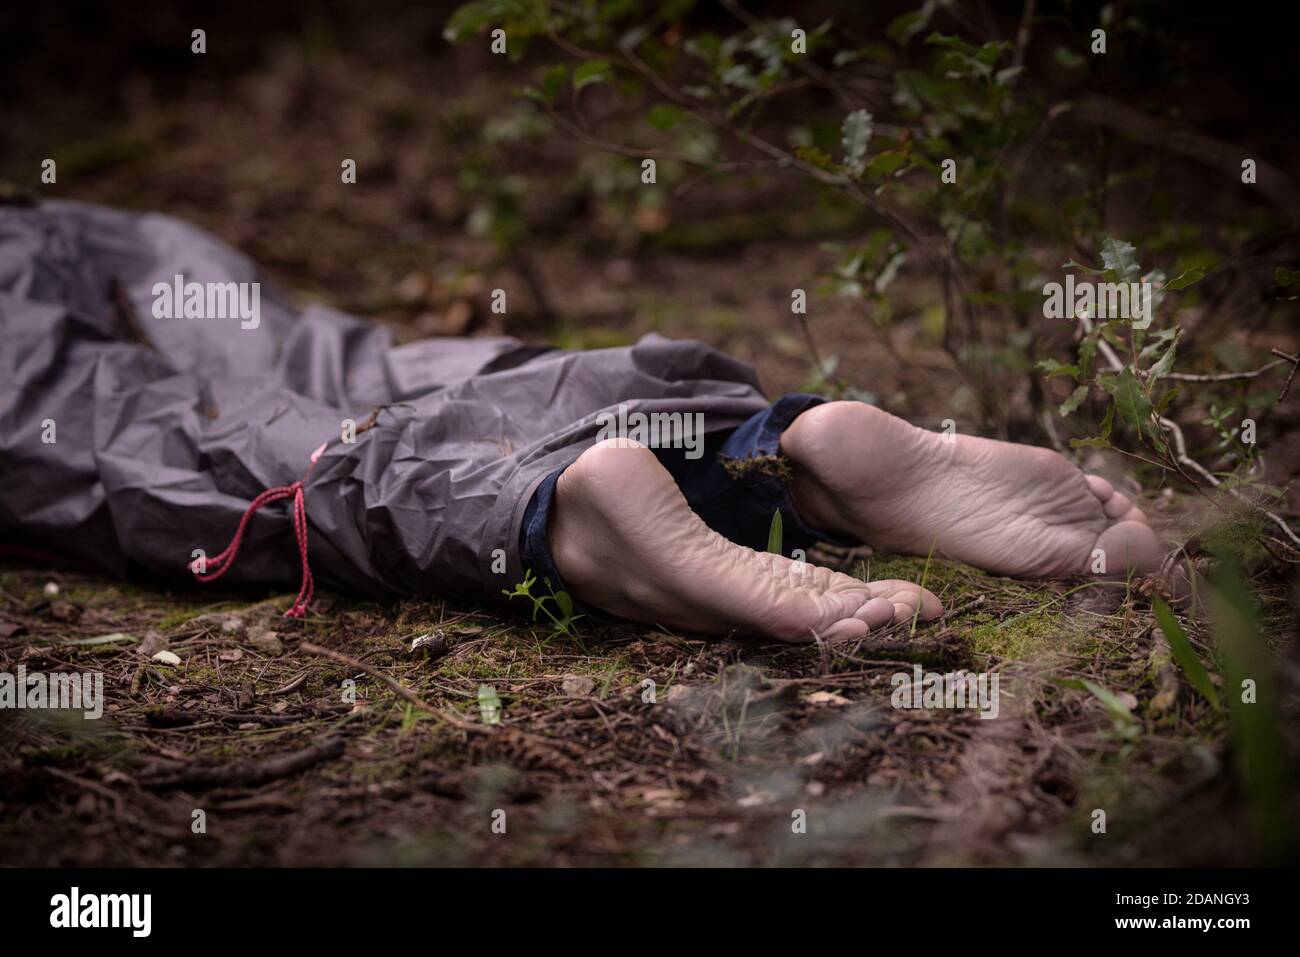 Barefoot dead body in the woods. Murder victim lying on the ground in the forest Stock Photo